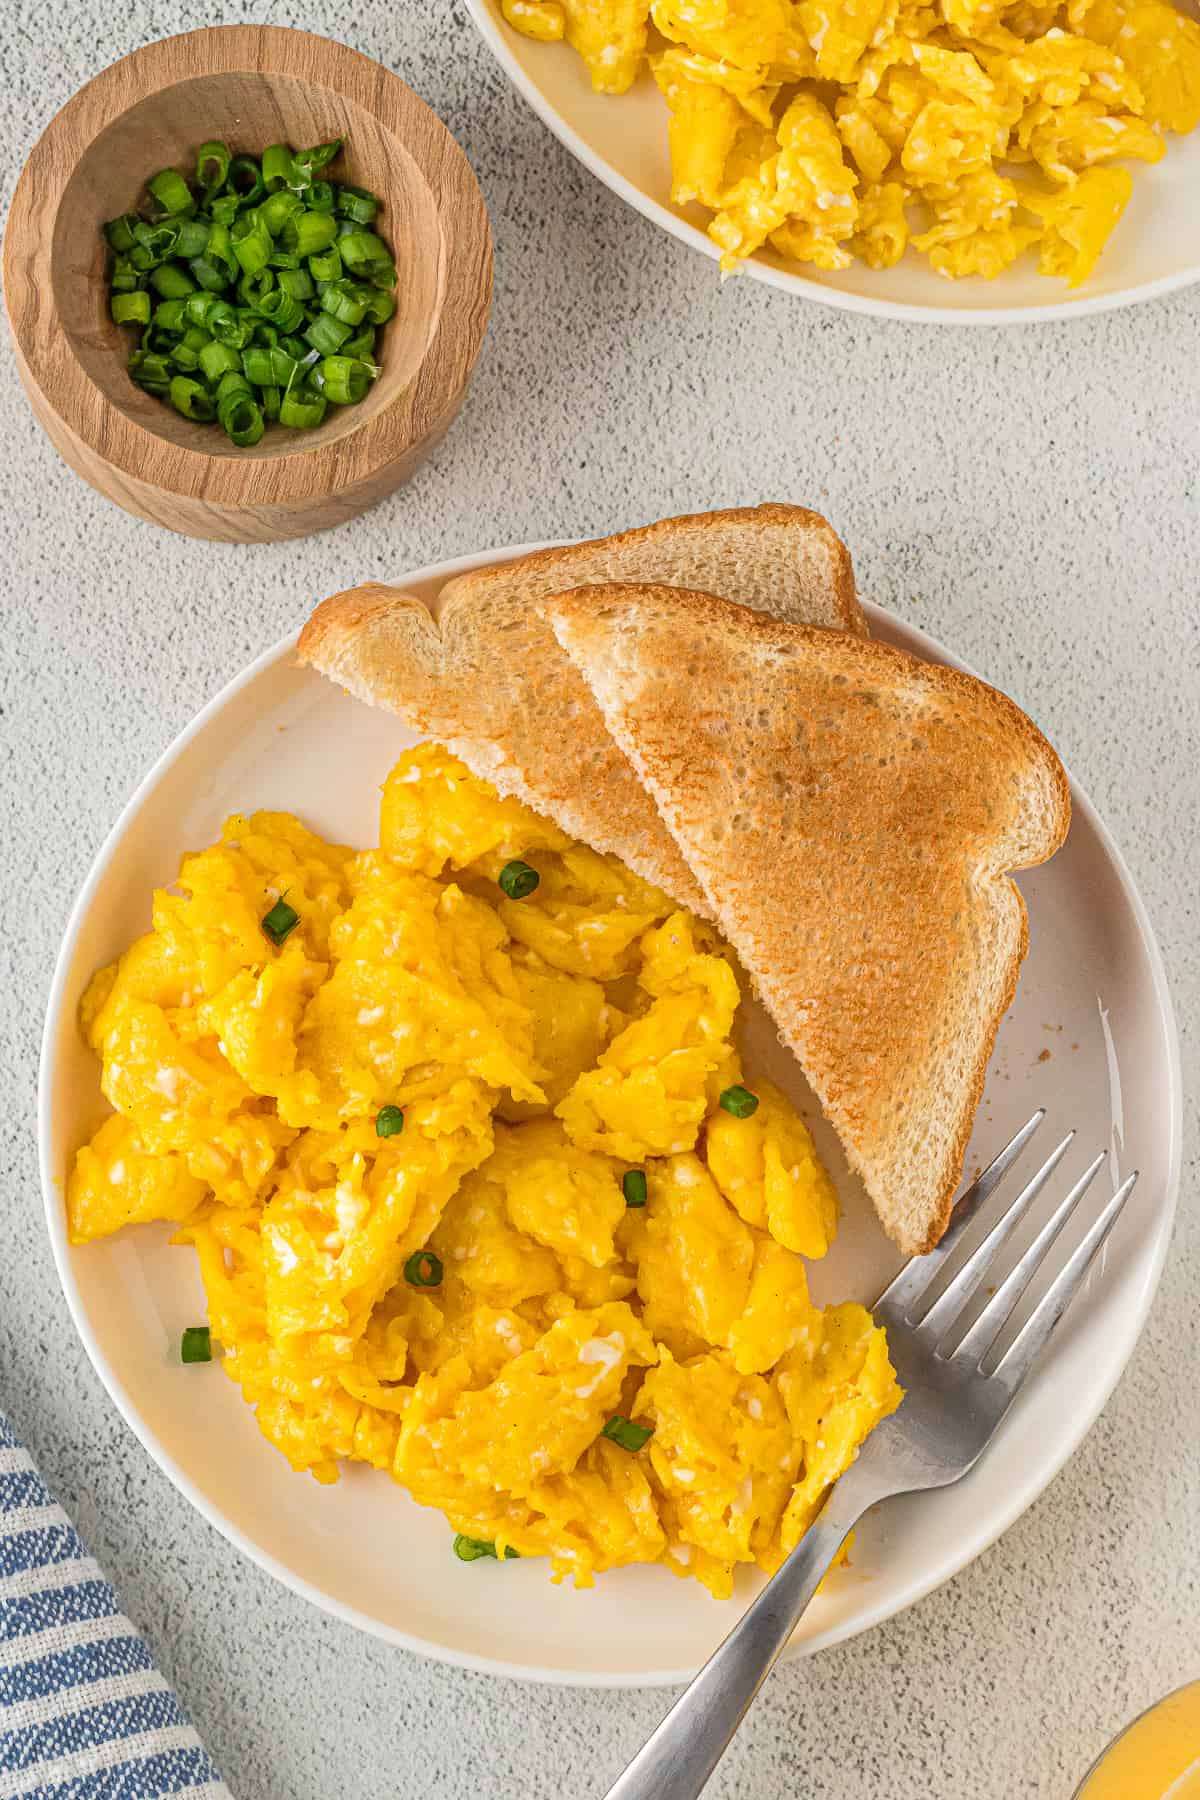 Scrambled eggs without milk on a plate.